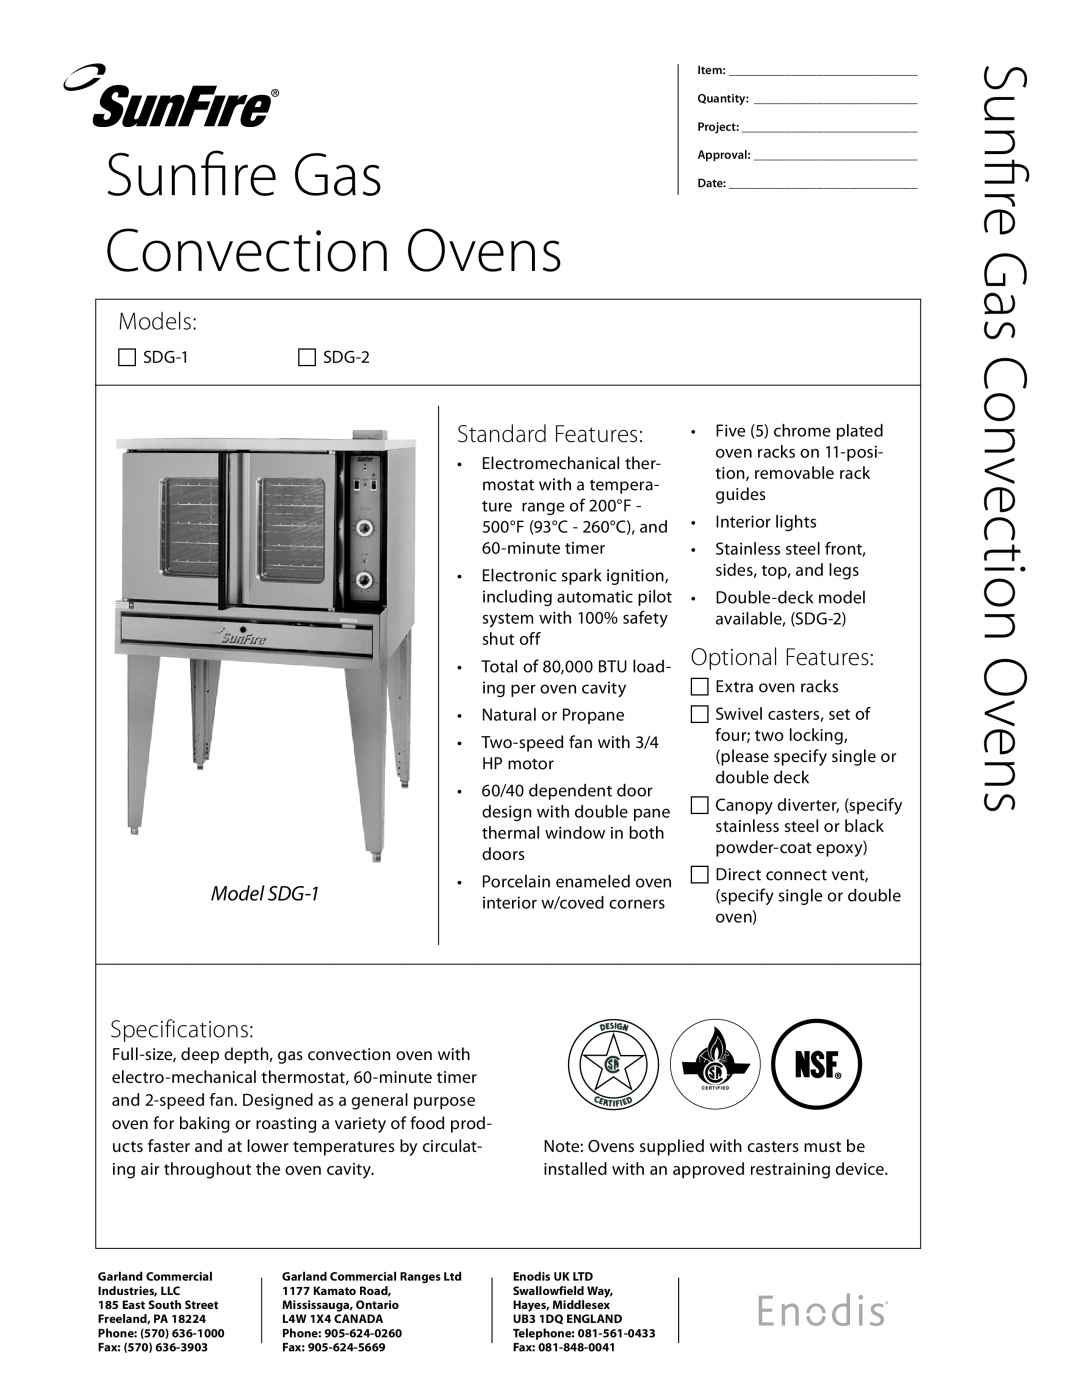 Sunfire SDG-2 specifications Convection Ovens, Sunfire Gas, Models, Standard Features, Optional Features, Specifications 